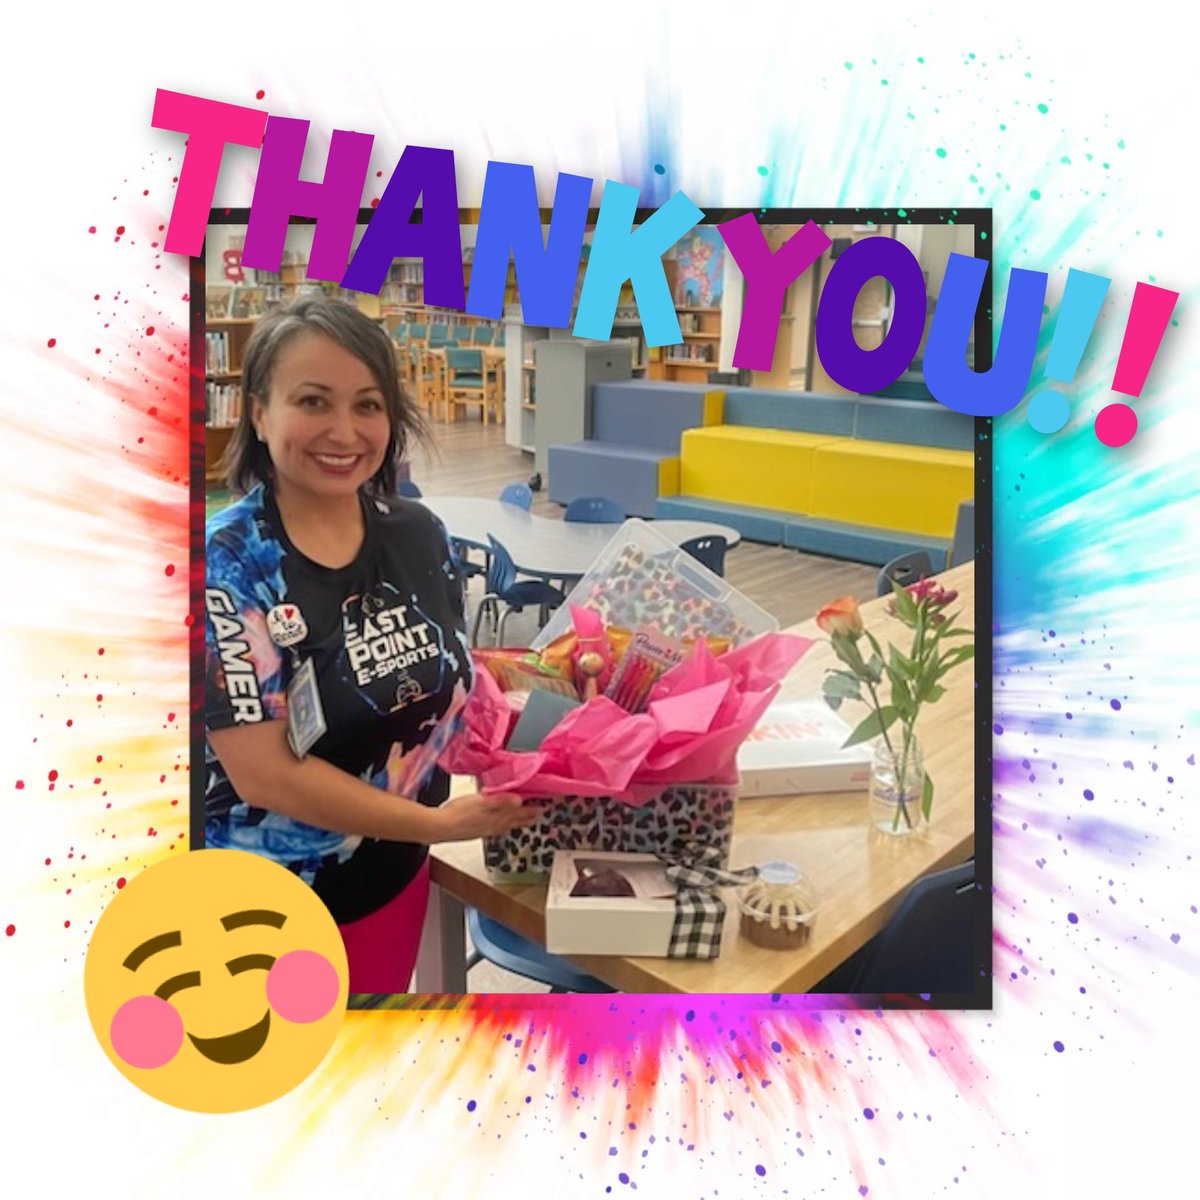 Thank you to my @EastPointES1 family for spoiling me rotten for IT Professional's Day @YsletaISD @YISDInnovLearn! Working with all of you is my absolute pleasure! 💞🙏🏻 @CPoblano2 @VCarrillo_EP @LBuck_79 @GCaraveo @MargieMherrera6 @cox-soto-rodarte